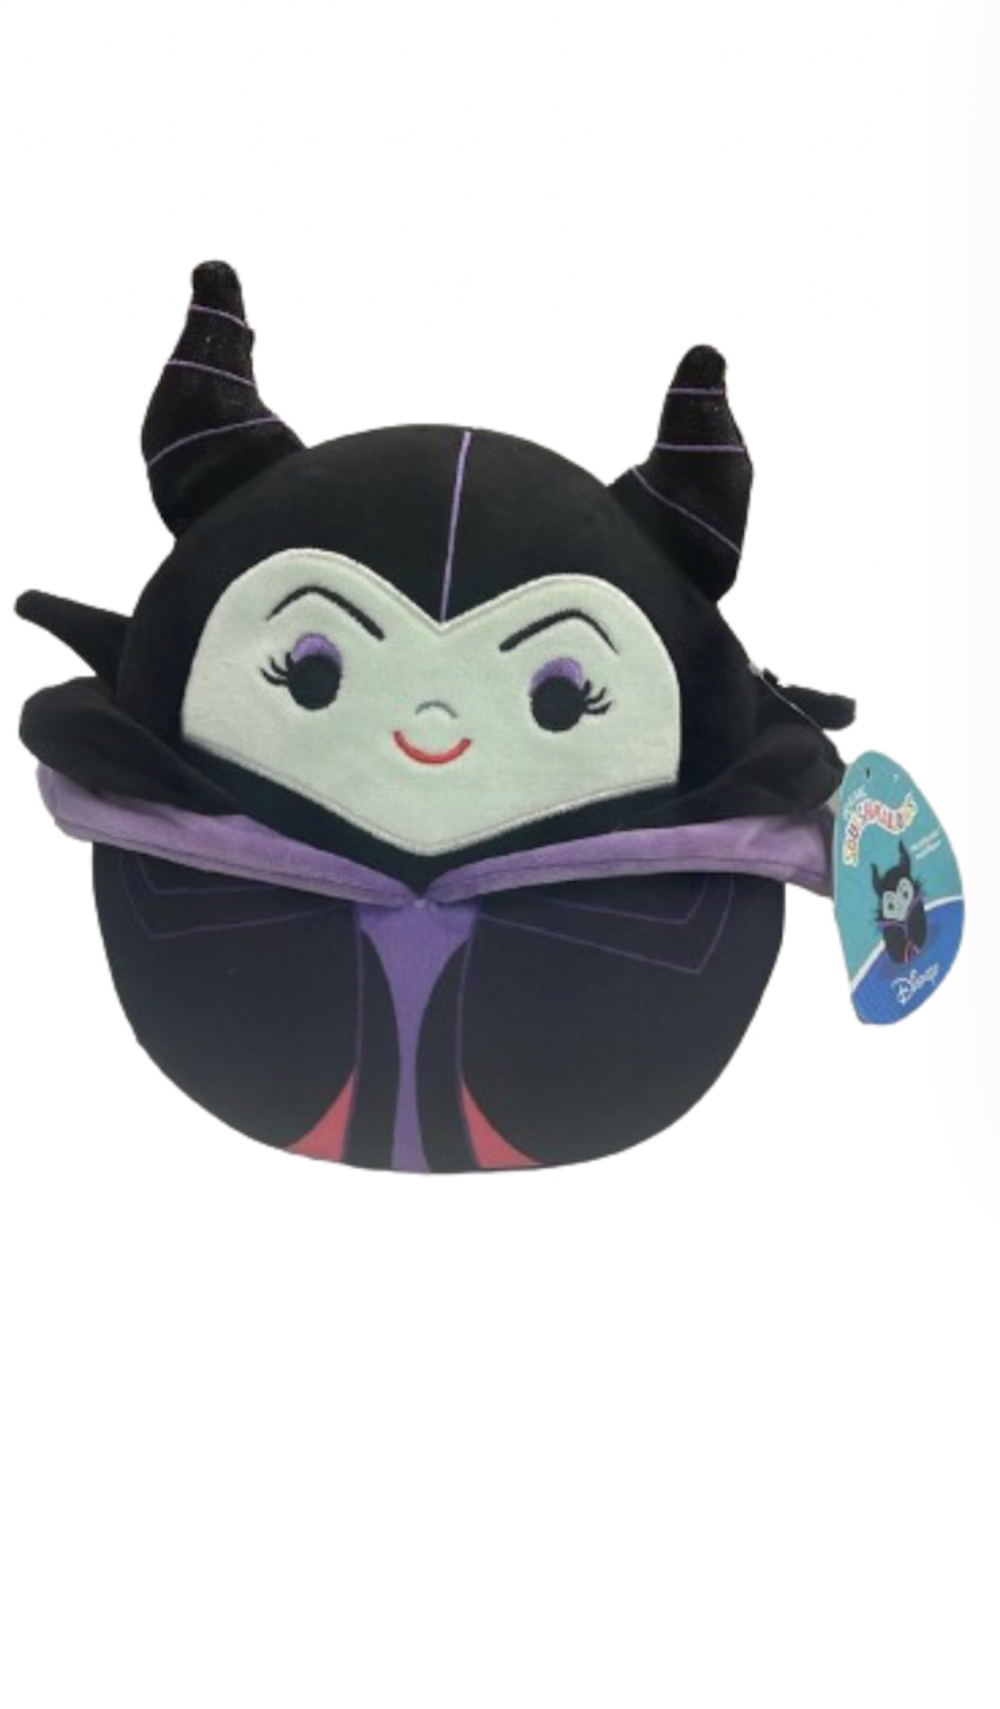 Squishmallow Original Disney Villains Maleficent 8" Plush Toy New With Tag